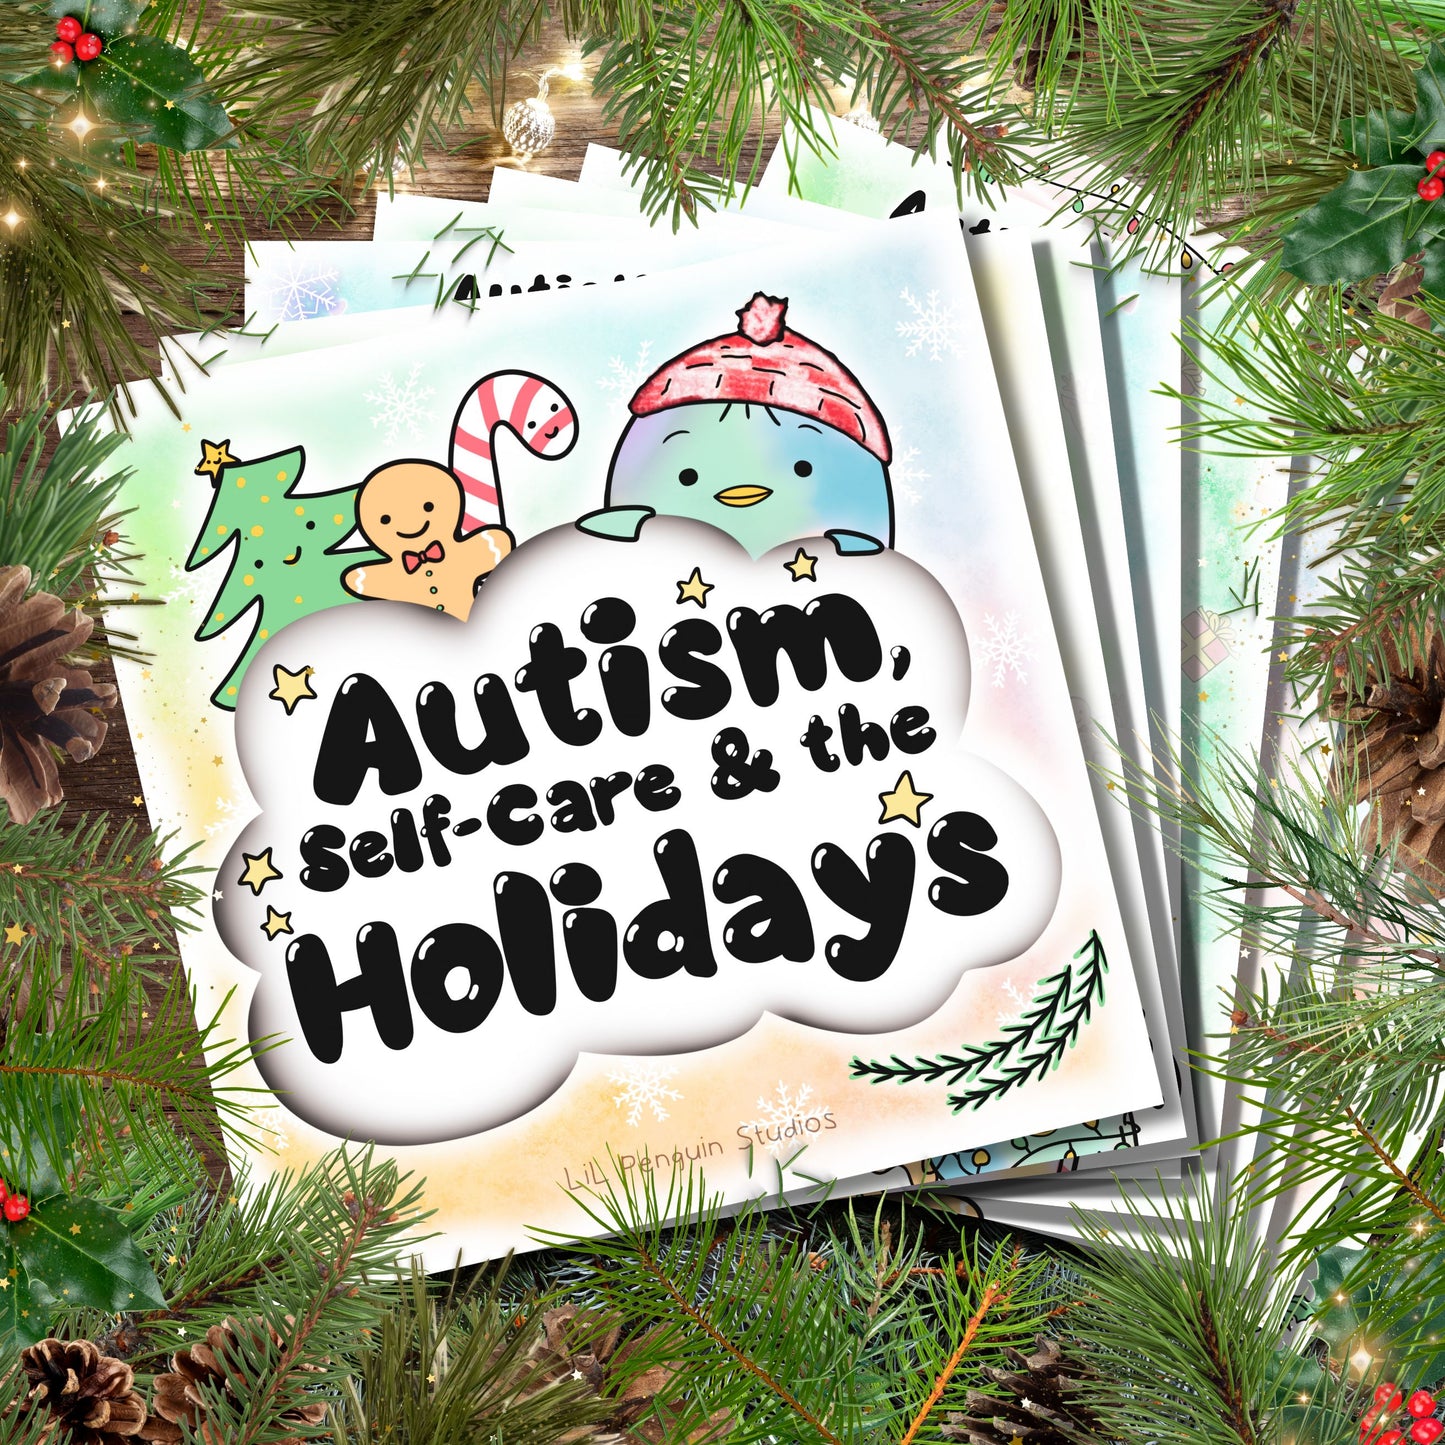 Autism, Self-Care and the Holidays. Autism Christmas Kit hand-drawn by an autistic artist.